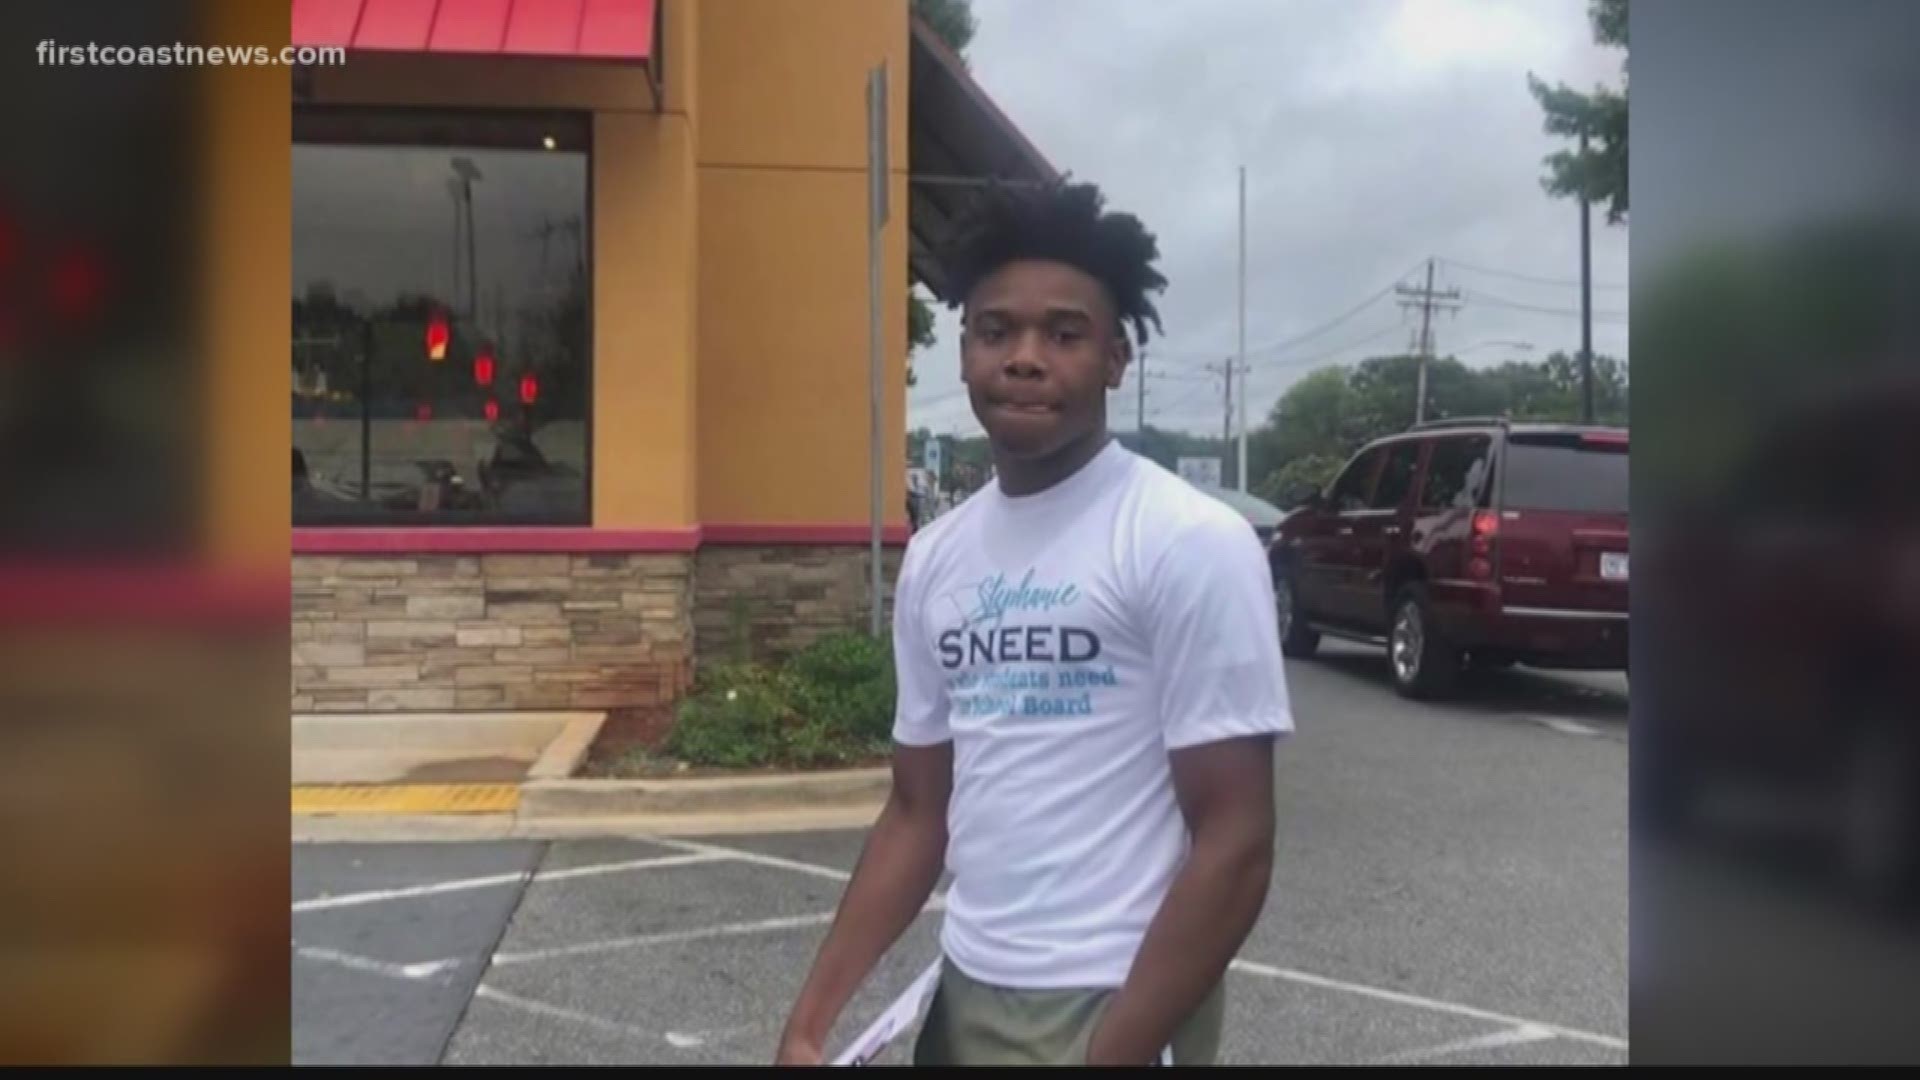 One young man was registering people to vote as they waited in line at Popeyes.